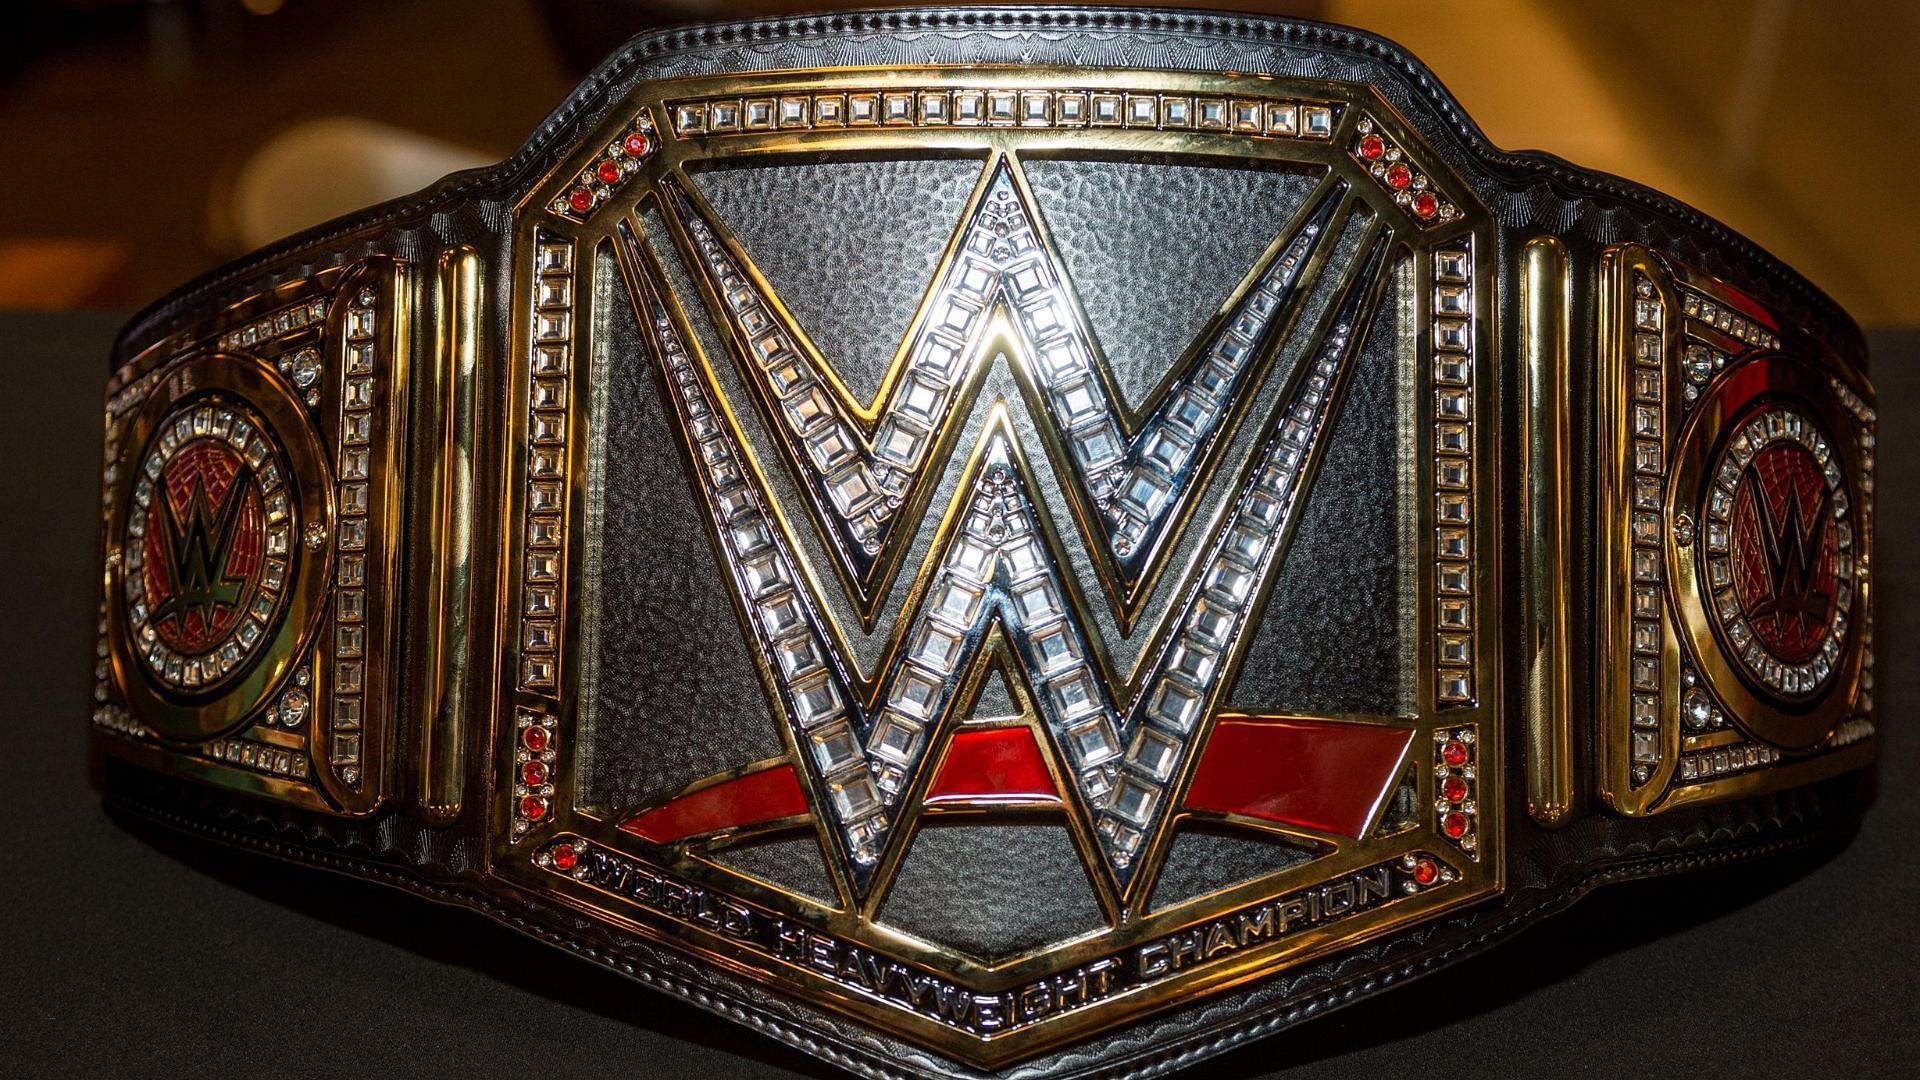 The WWE Championship is considered by many the top prize in professional wrestling.